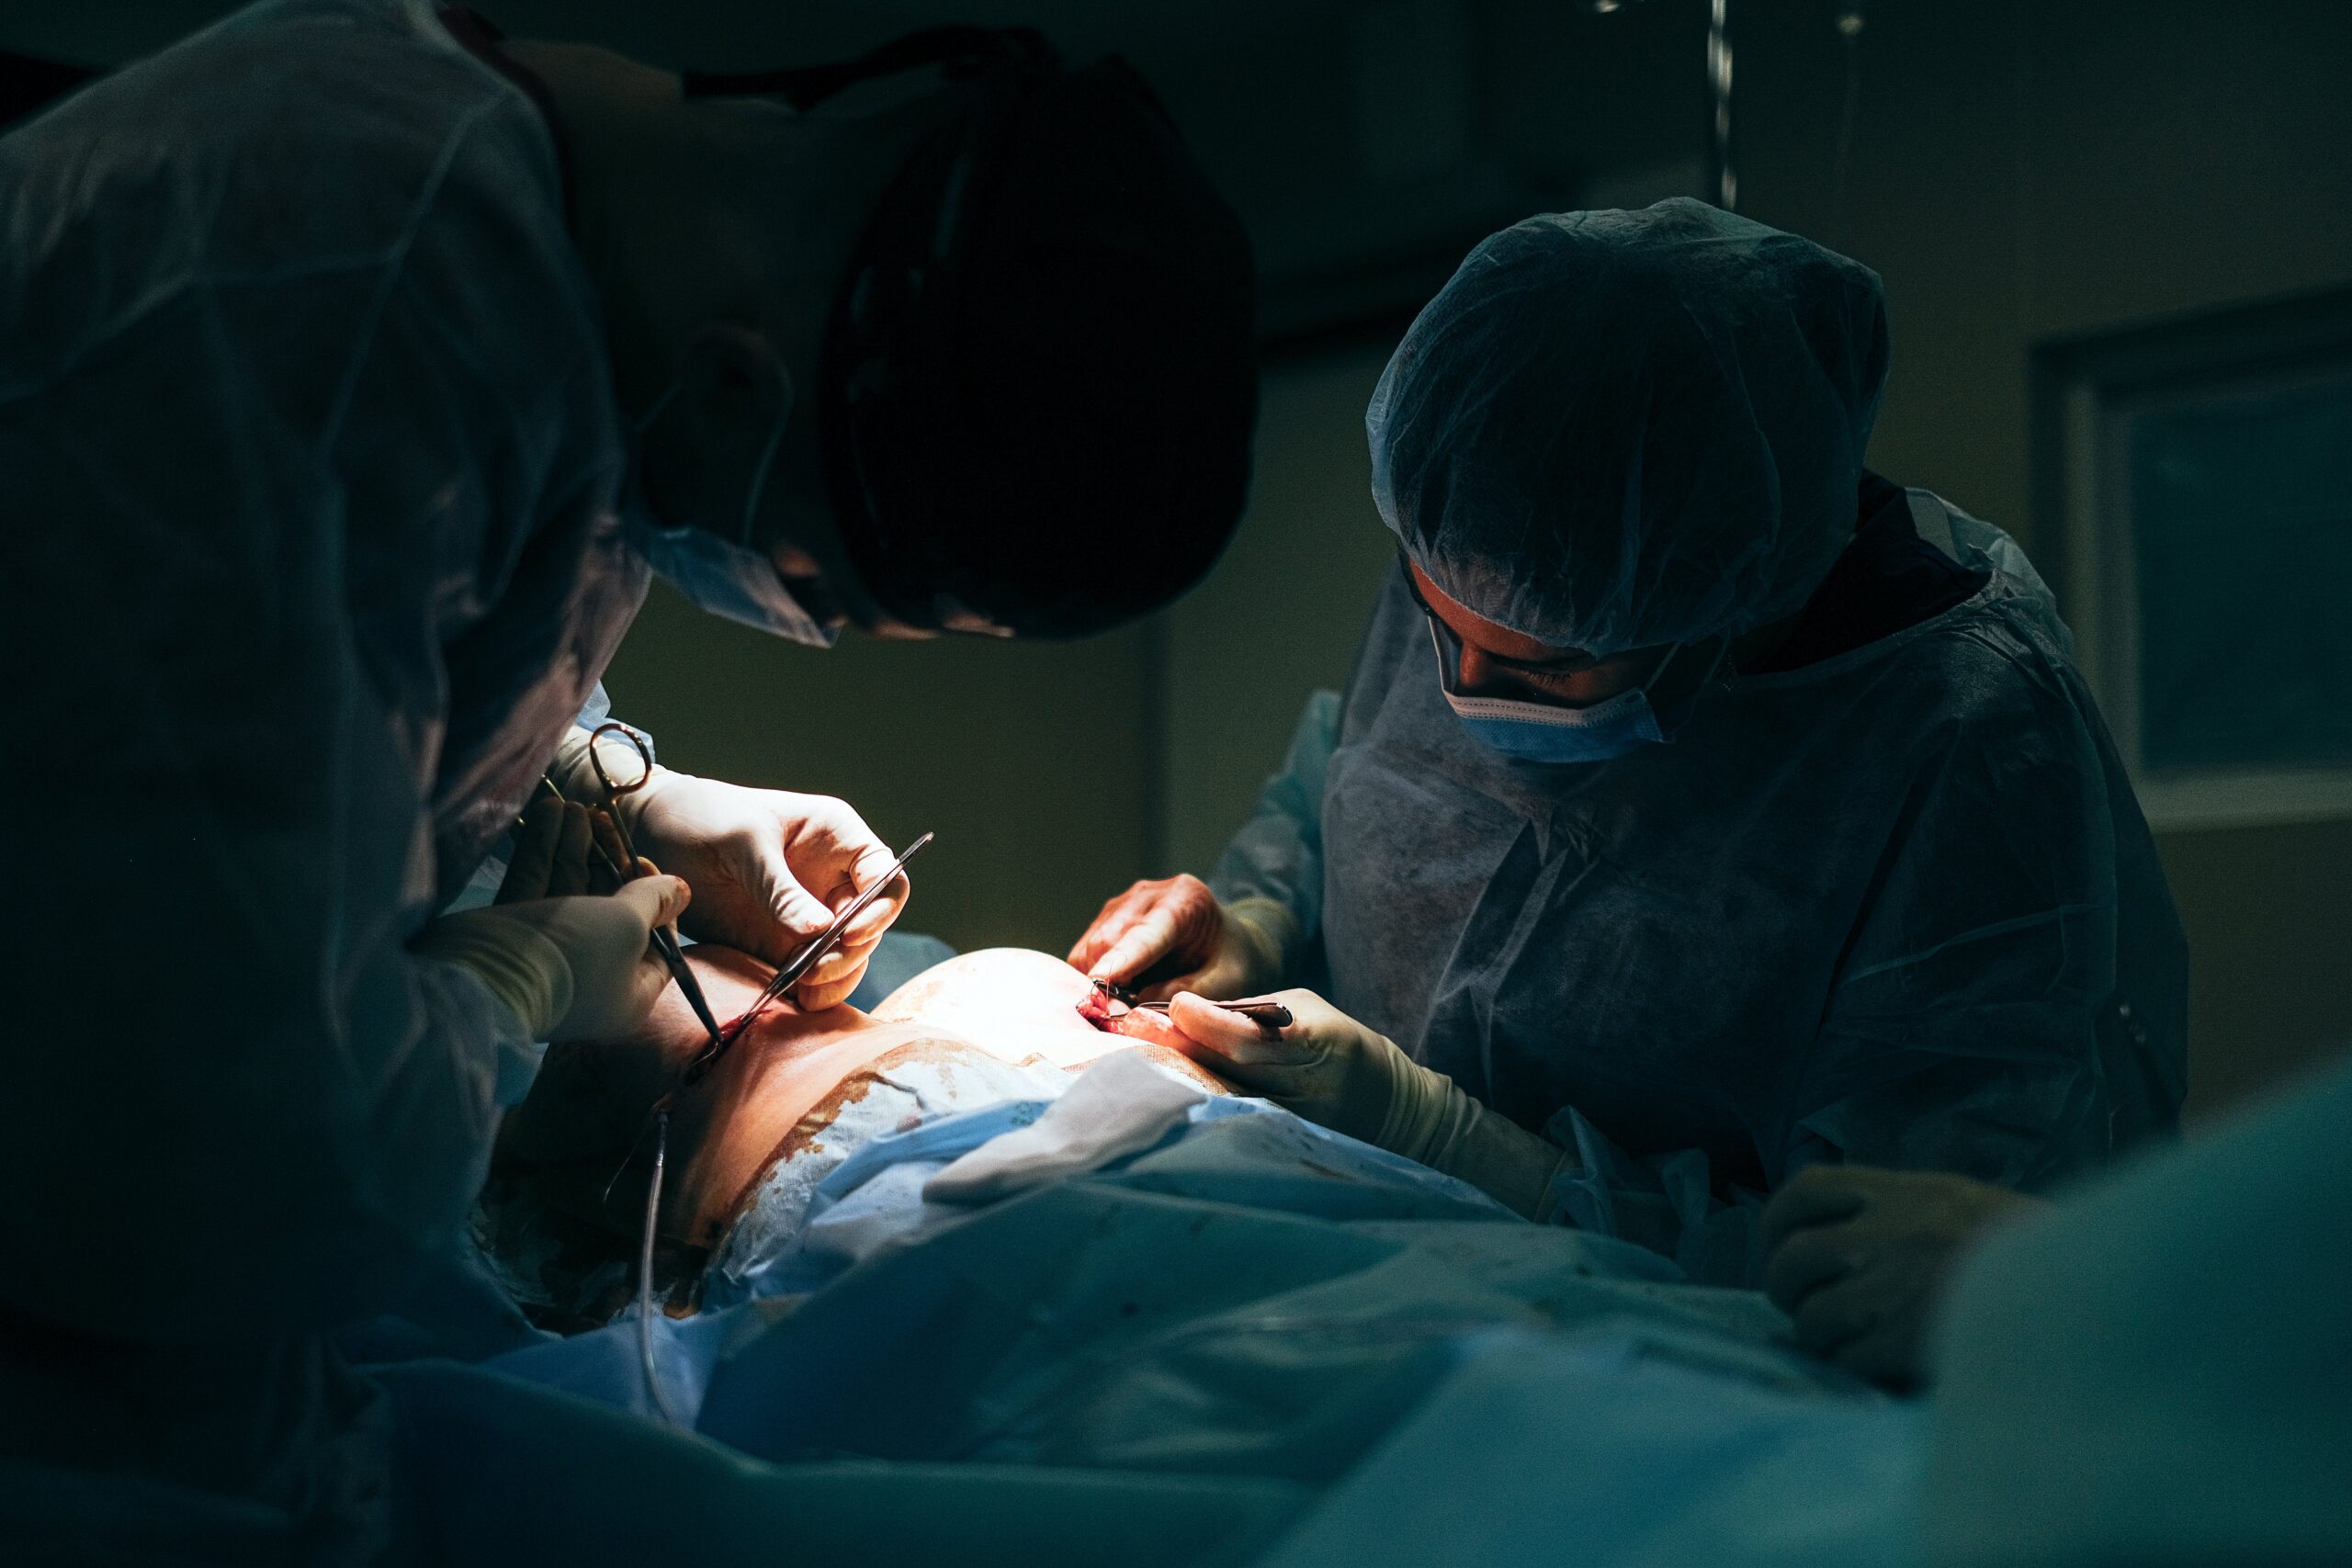 Surgeons are conducting breast augmentation surgery on a patient.